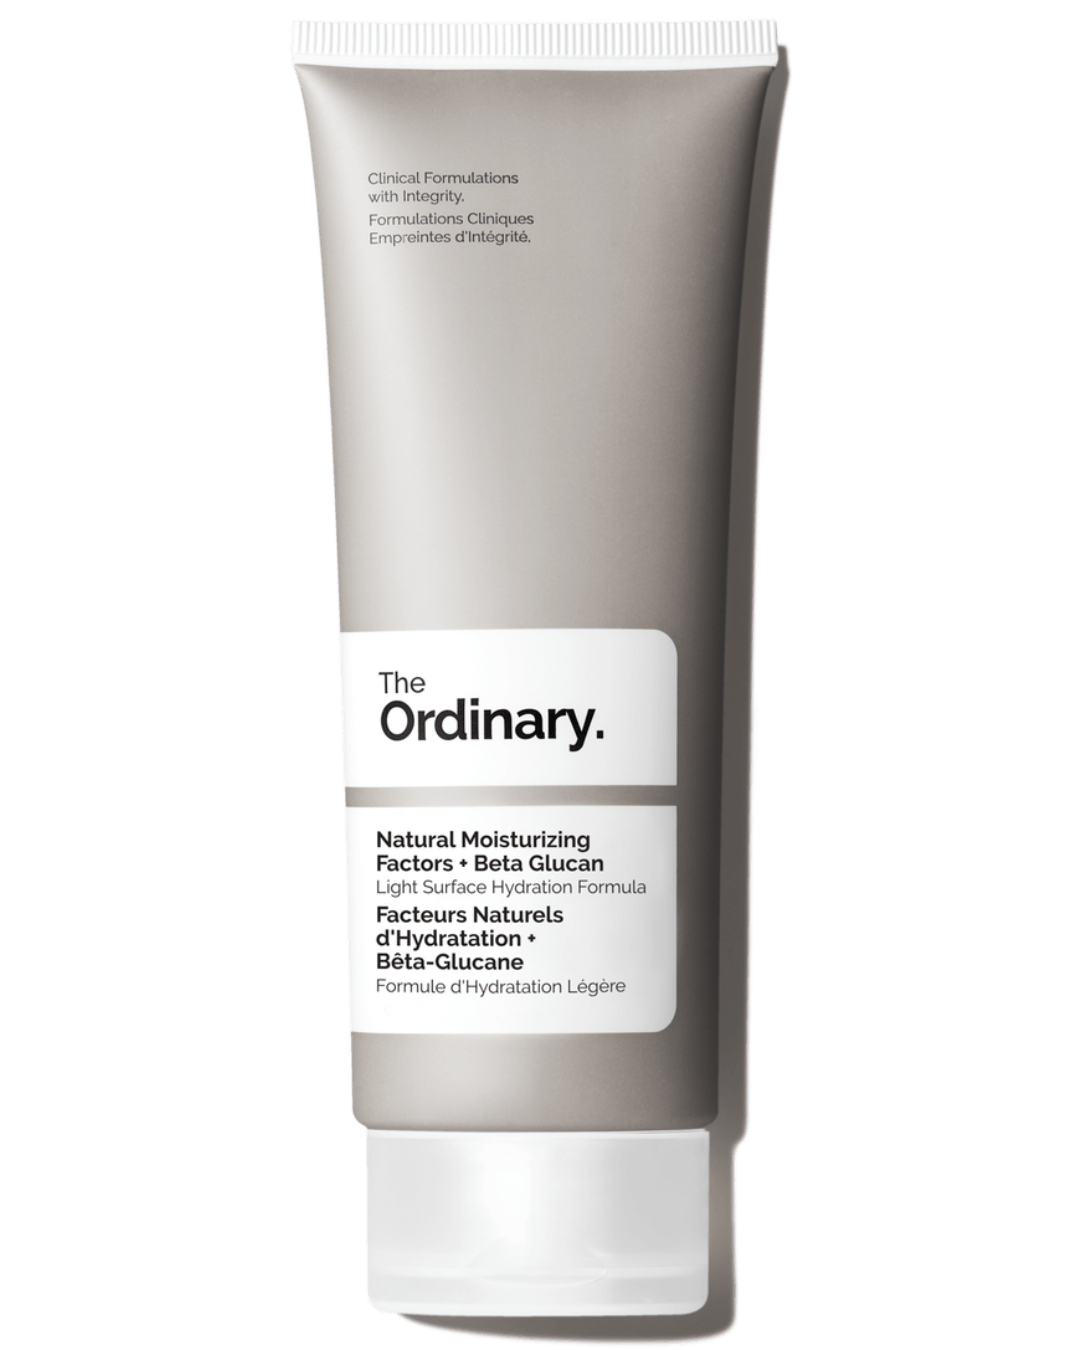 Daily Vanity Beauty Awards 2024 Best  The Ordinary Natural Moisturizing Factors + Beta Glucan Voted By Beauty Experts